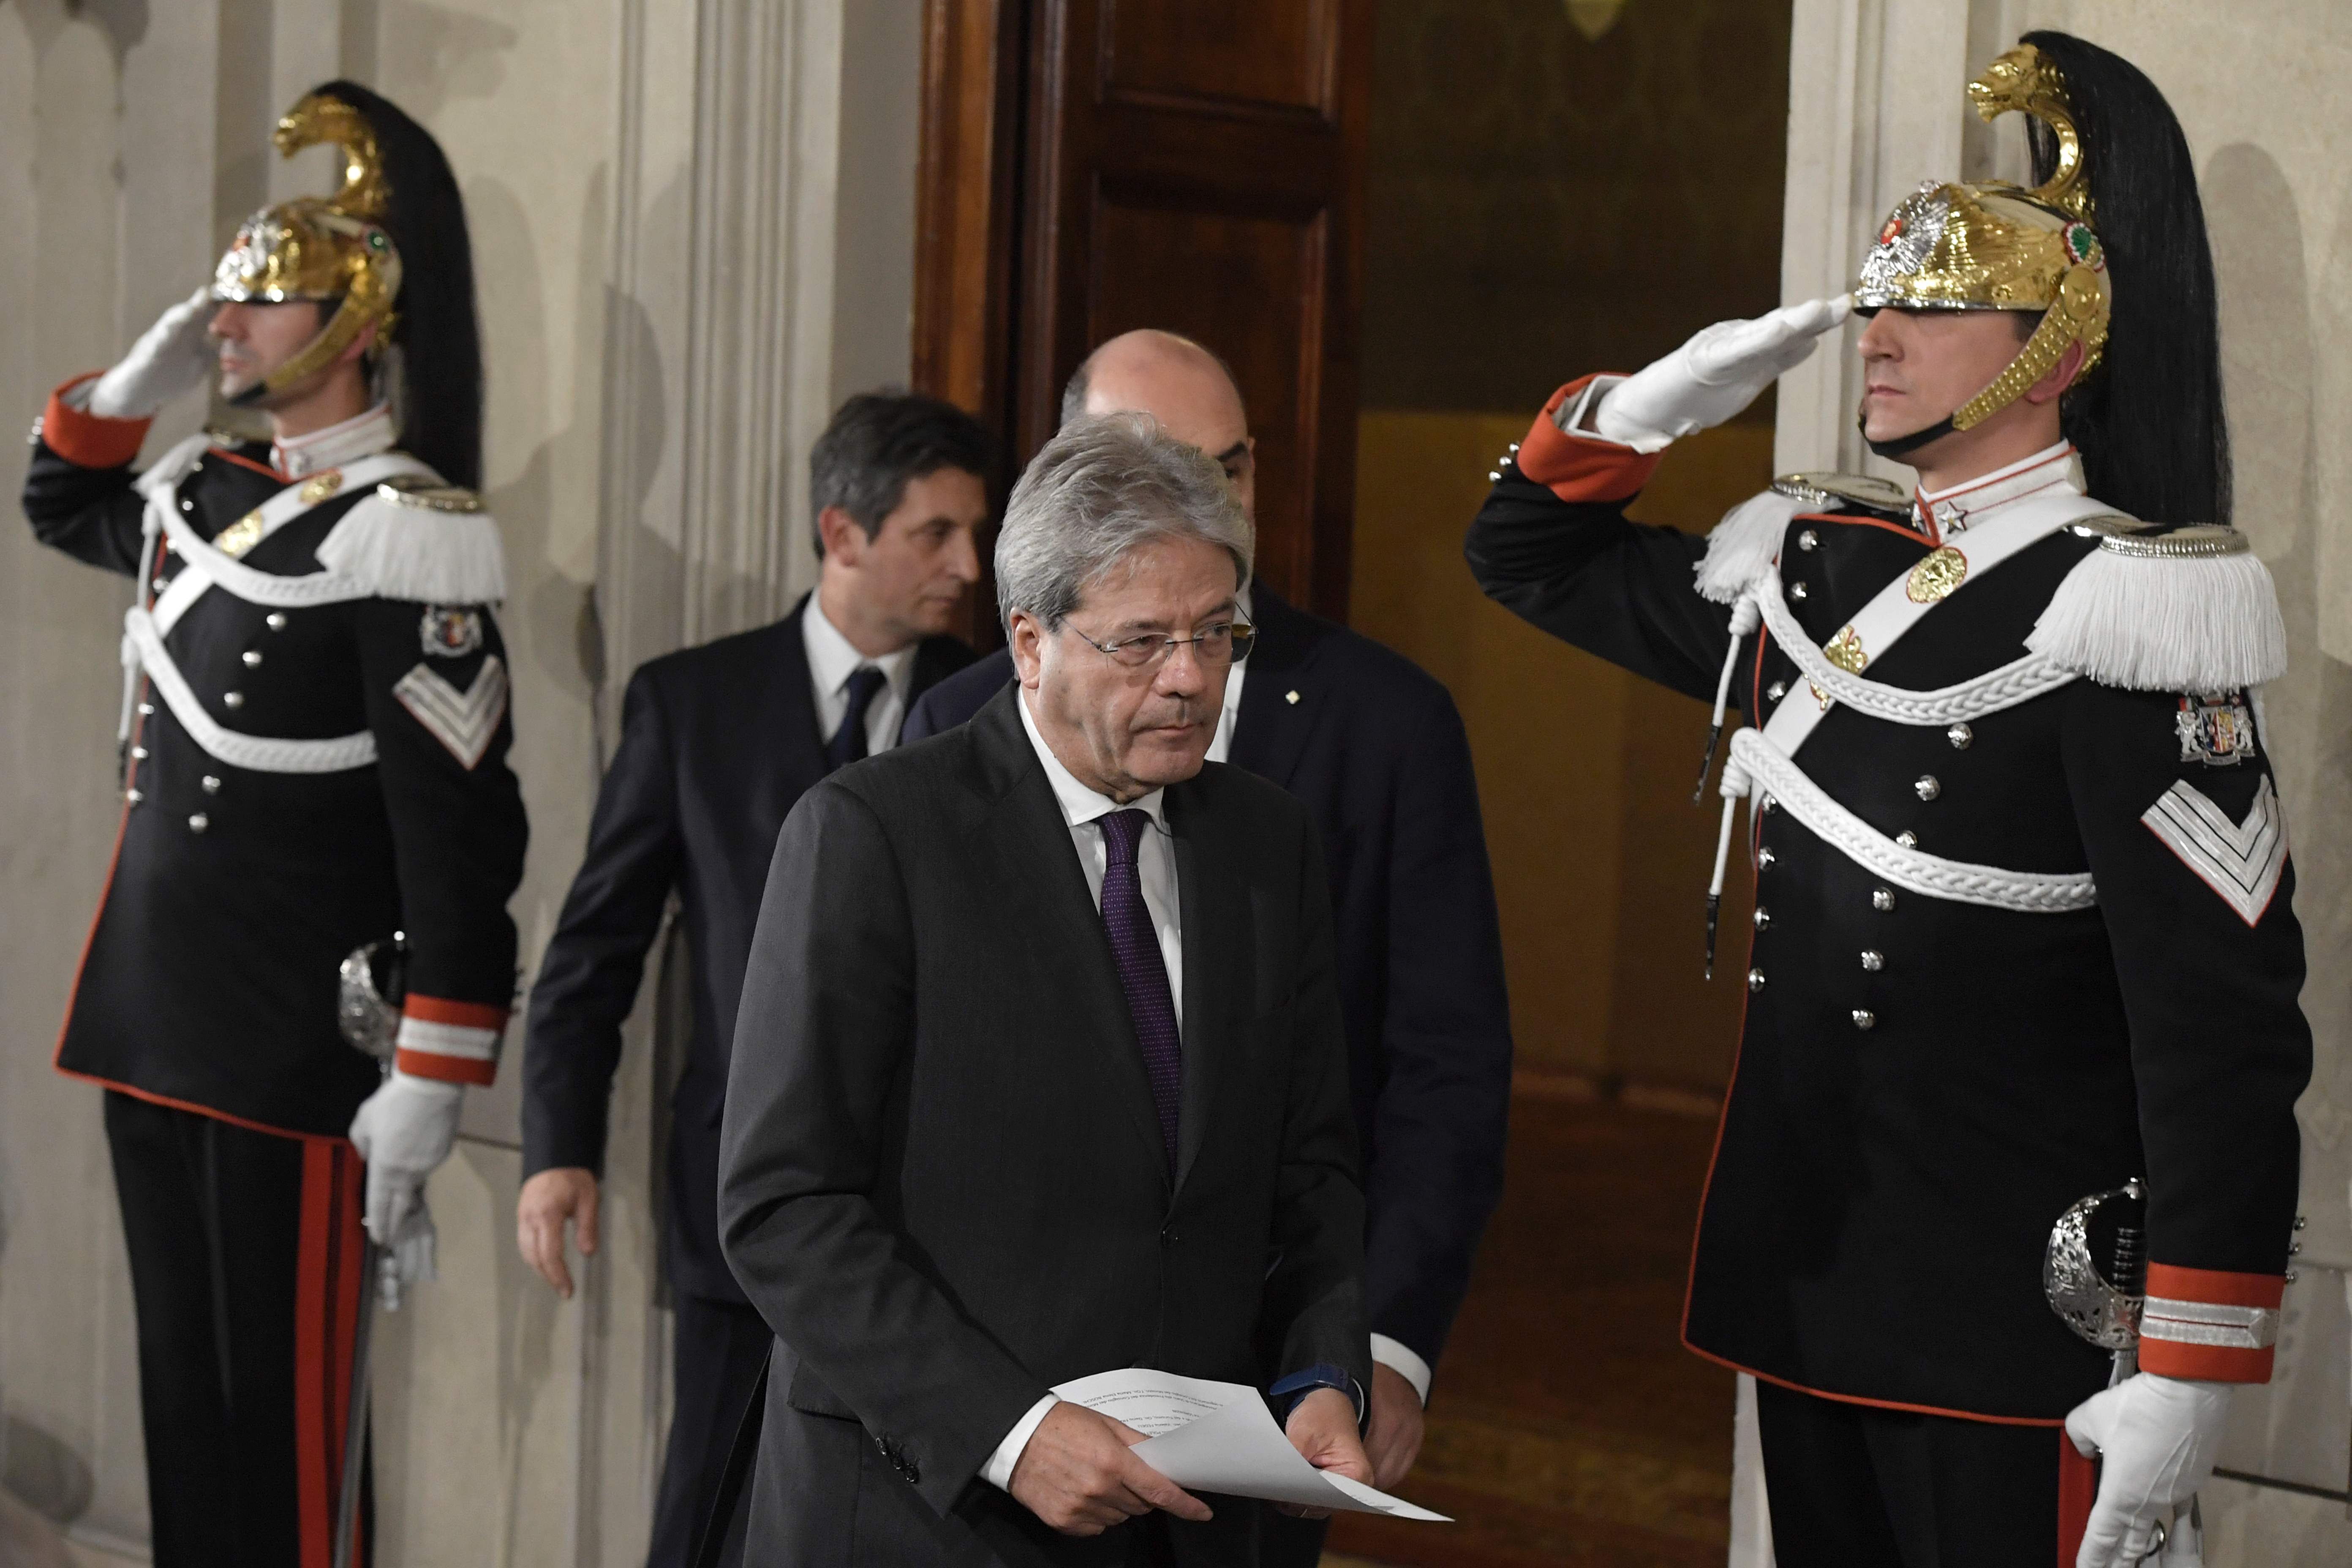 New Italian PM Gentiloni unveils new government, but centre-right ally threatens to quit